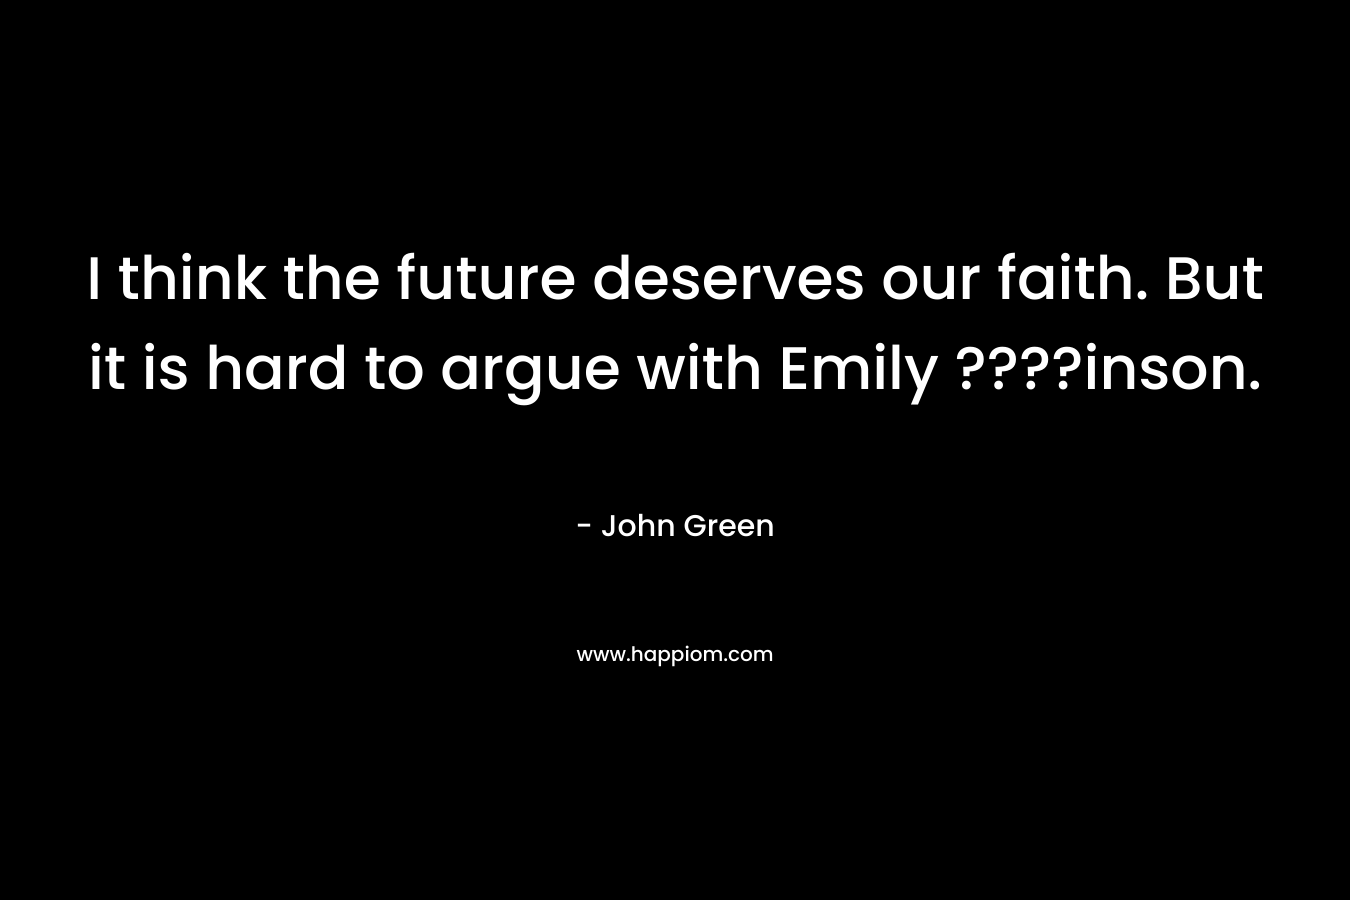 I think the future deserves our faith. But it is hard to argue with Emily ????inson.